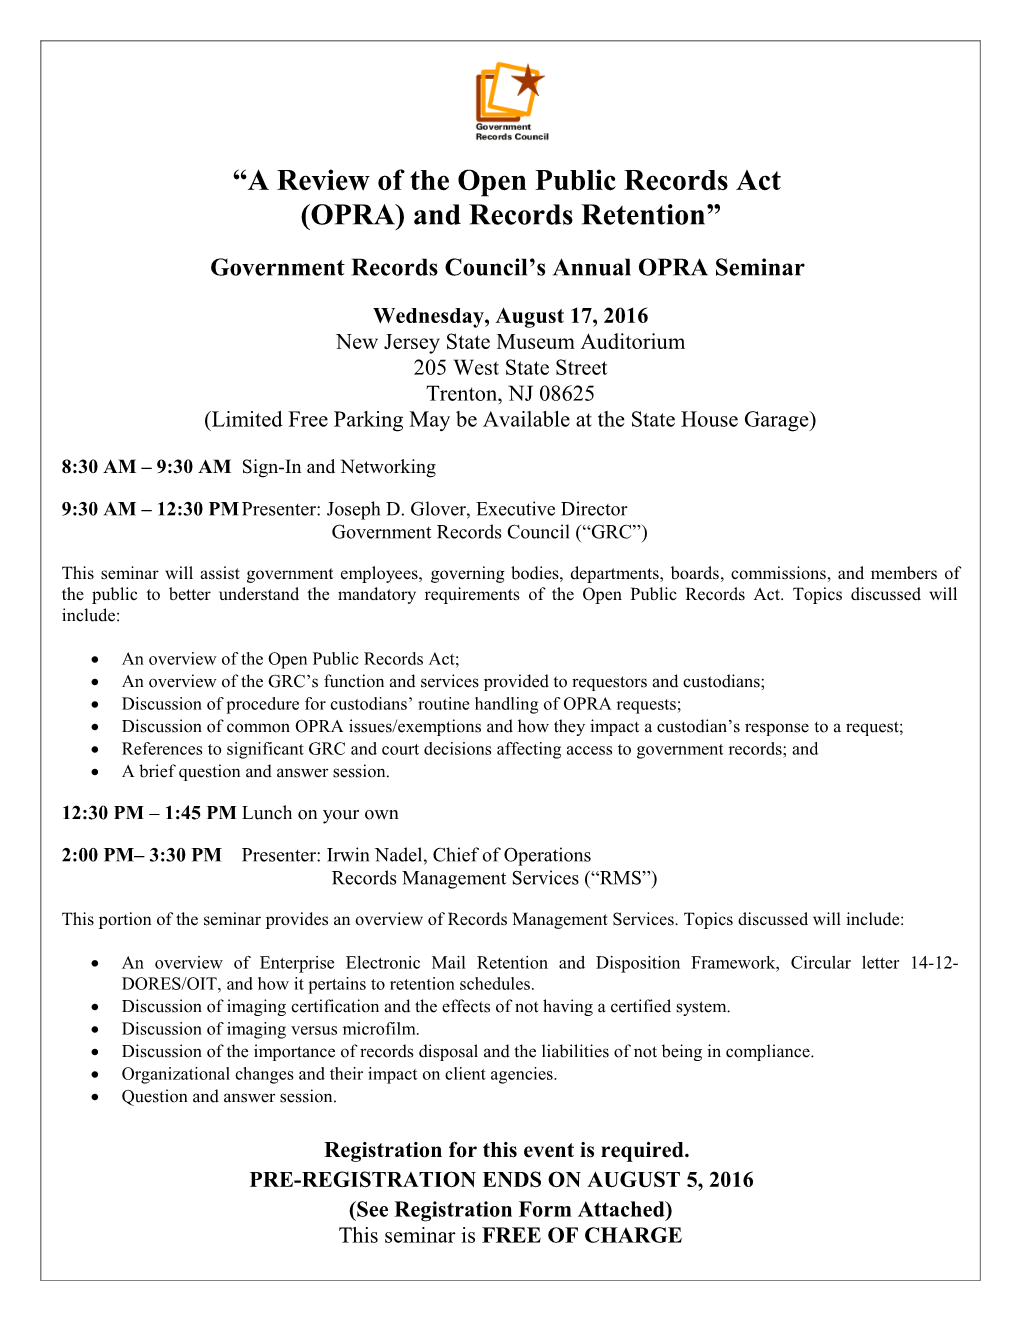 A Review of the Open Public Records Act